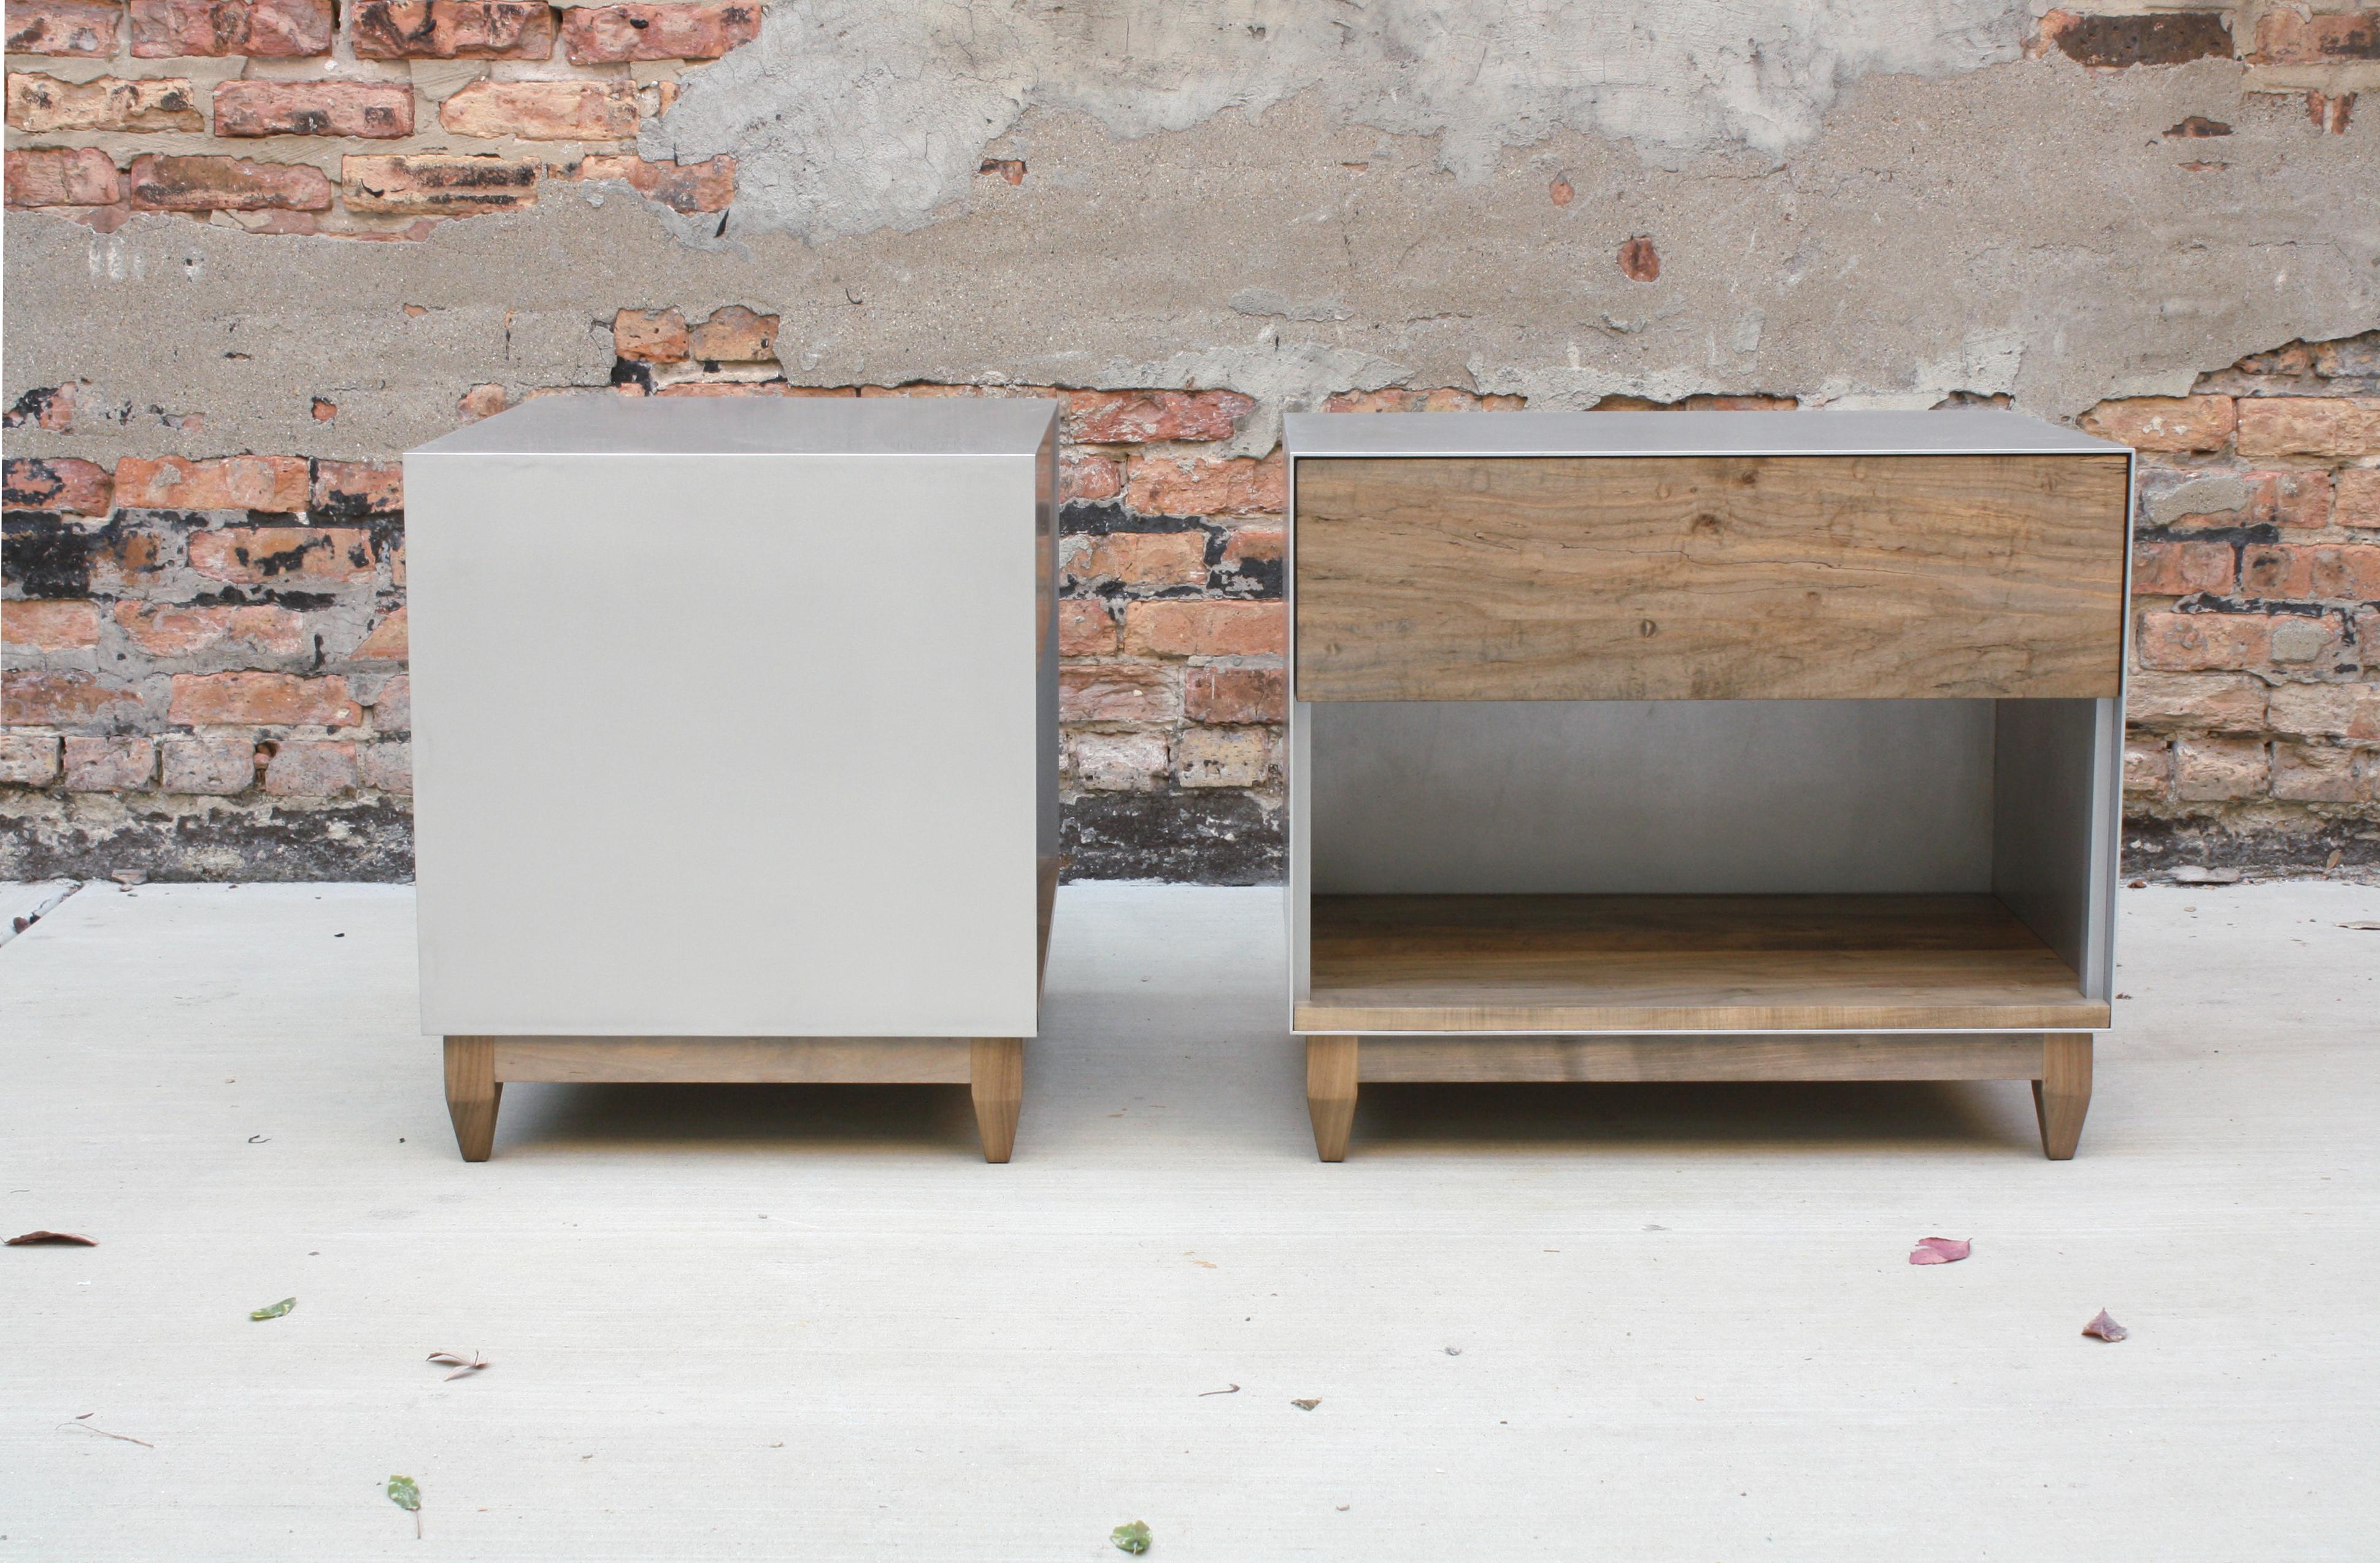 Handmade in Chicago by Laylo Studio, these customizable nightstands or bedside tables feature a waxed aluminium case and a solid wood interior, drawer front and base. The seamless metal case built from precision welded aircraft aluminum frames a